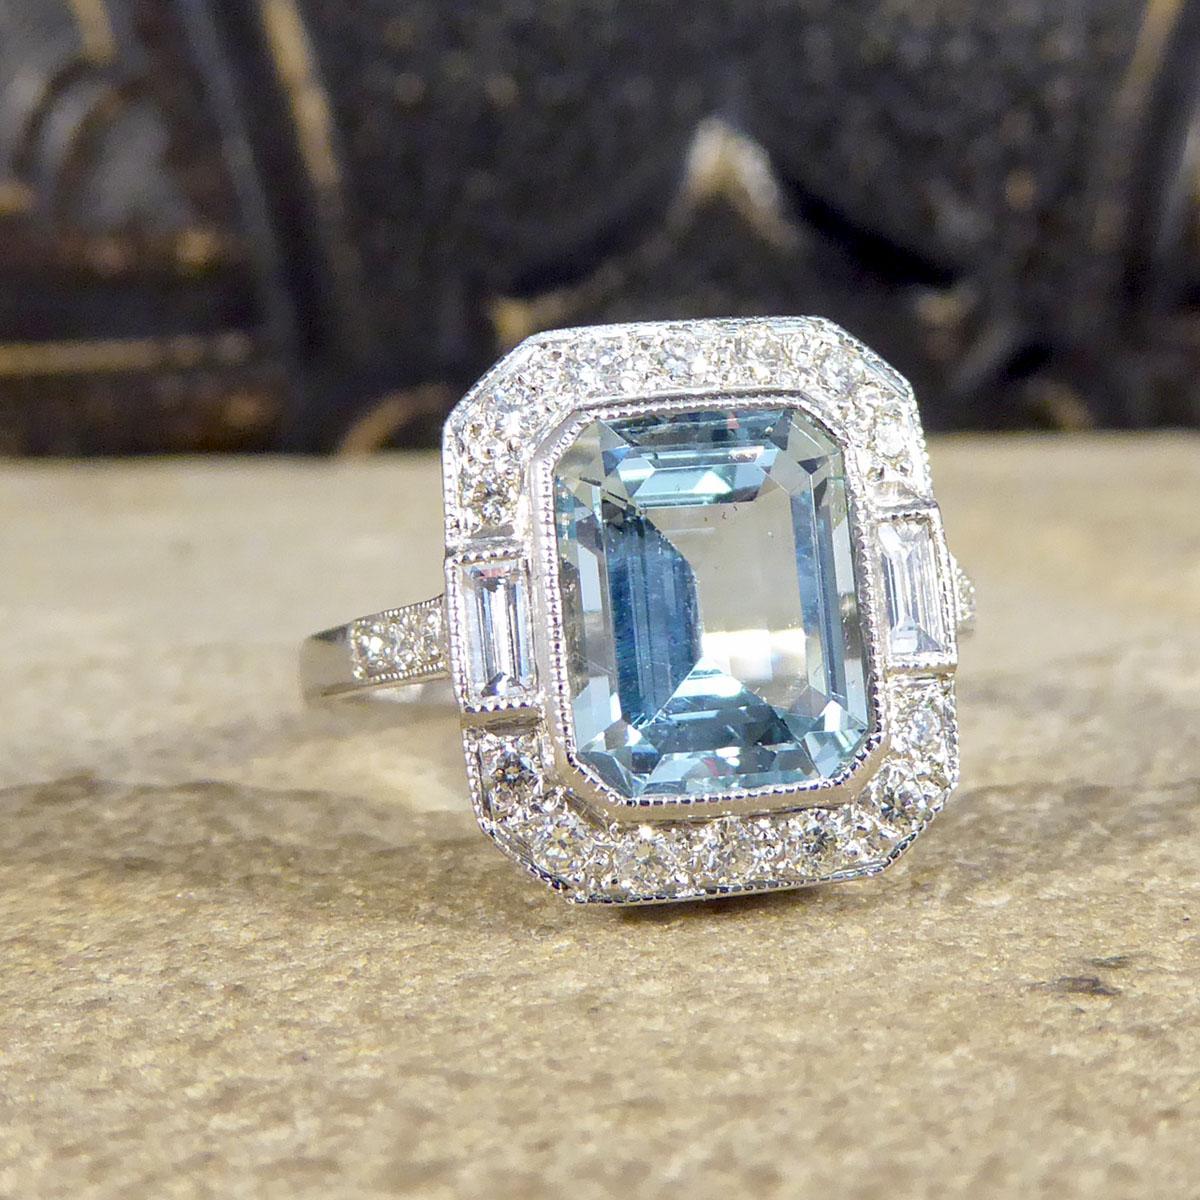 This statement cluster ring holds a 2.10ct Emerald Cut Aquamarine in a rub over collar setting with a Diamond surround. With a total Diamond weight of 0.45ct, these modern brilliant cut and baguette cut diamonds create an extra sparkle to this